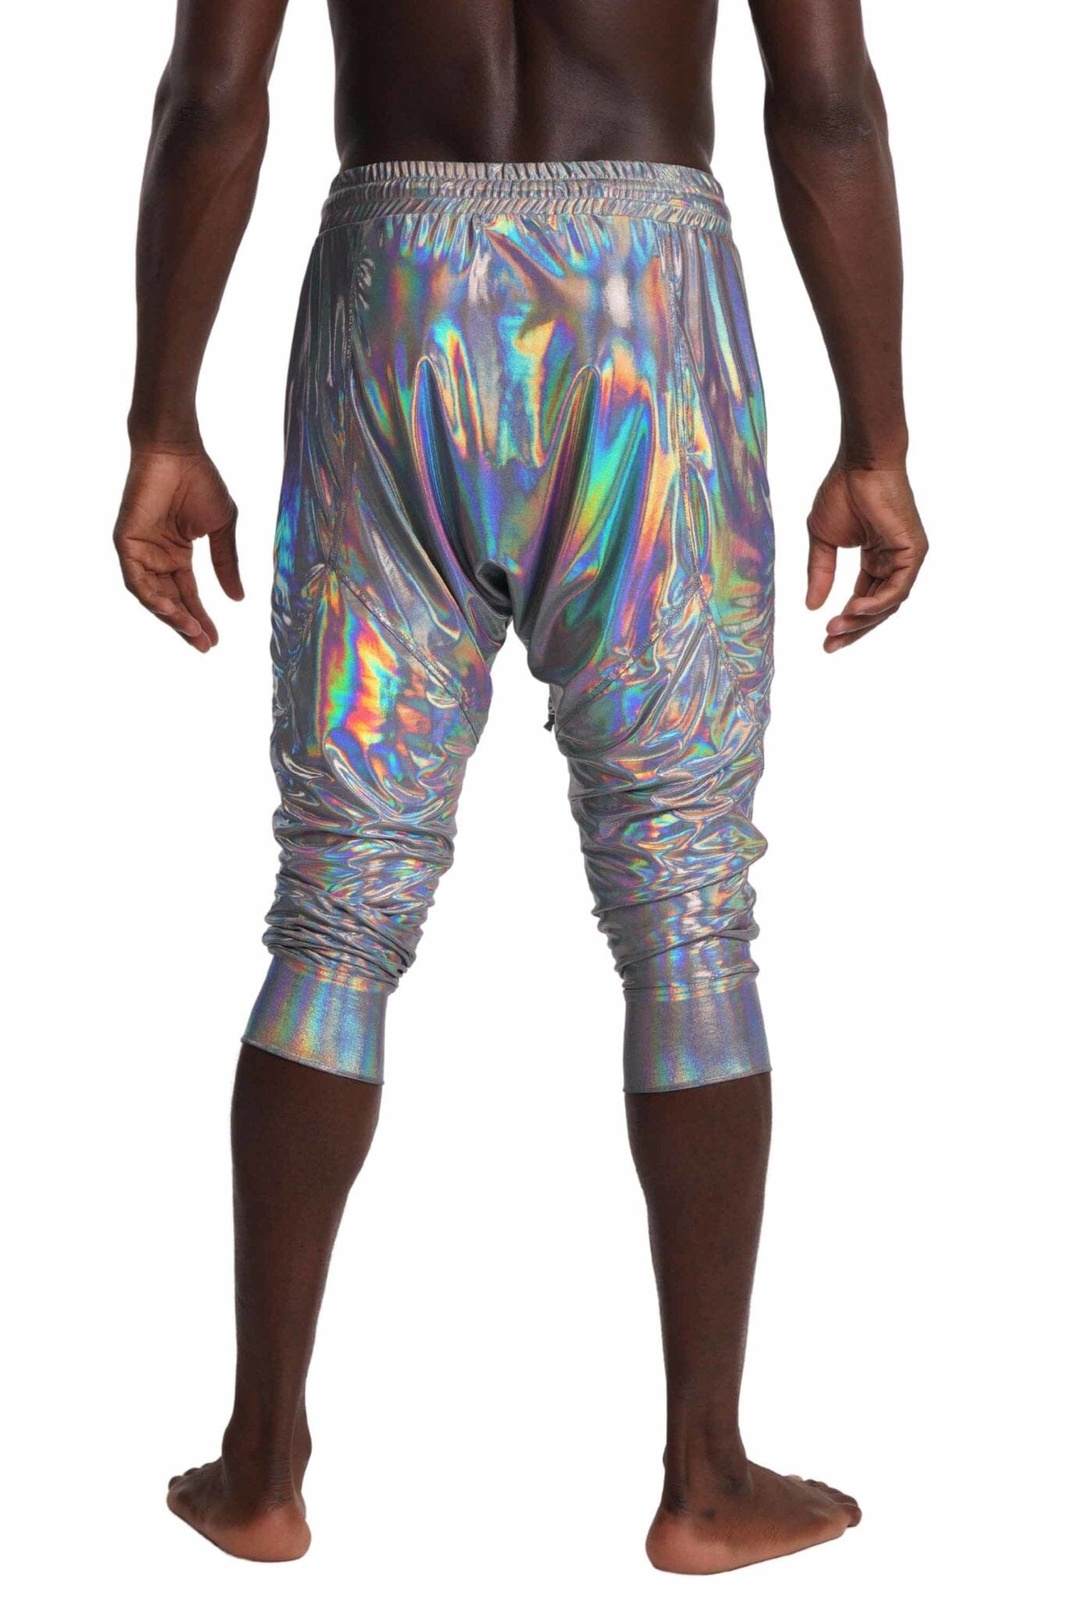 Mens 3 quarter length shorts in holographic Chromatic spandex from Love Khaos